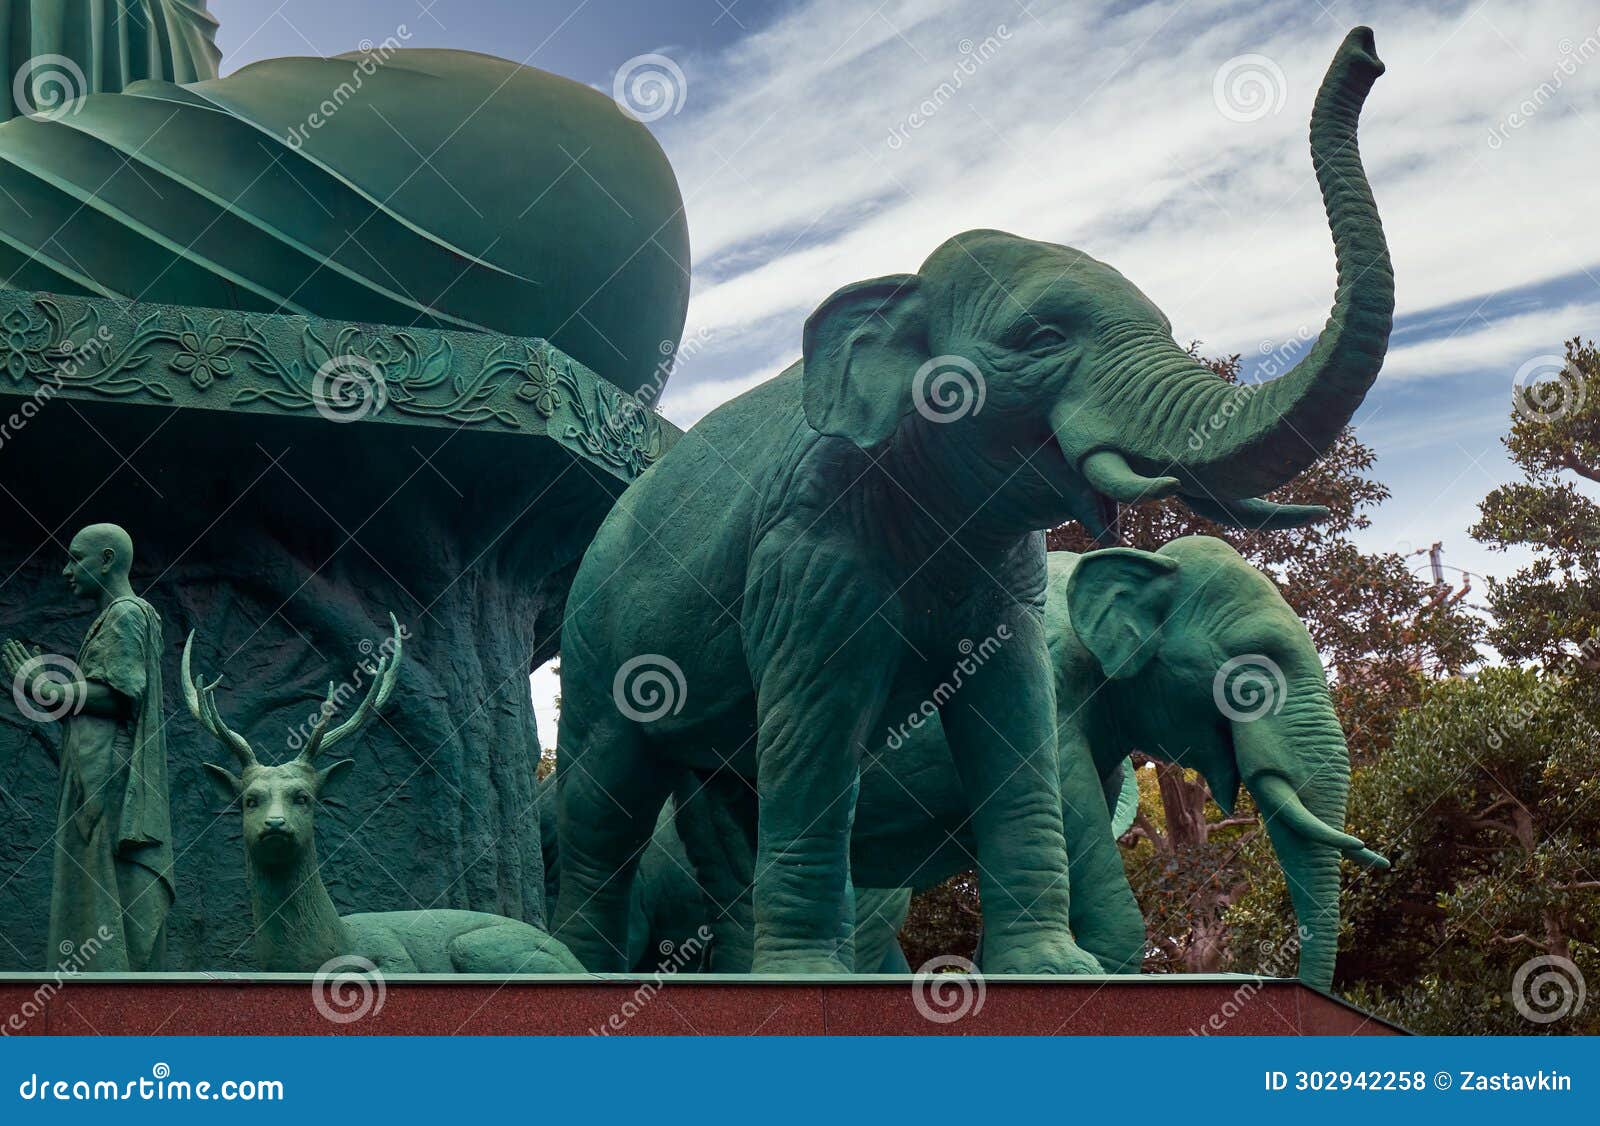 Statues of Elephants, Reindeer and Monks Surrounding Great Buddha at ...